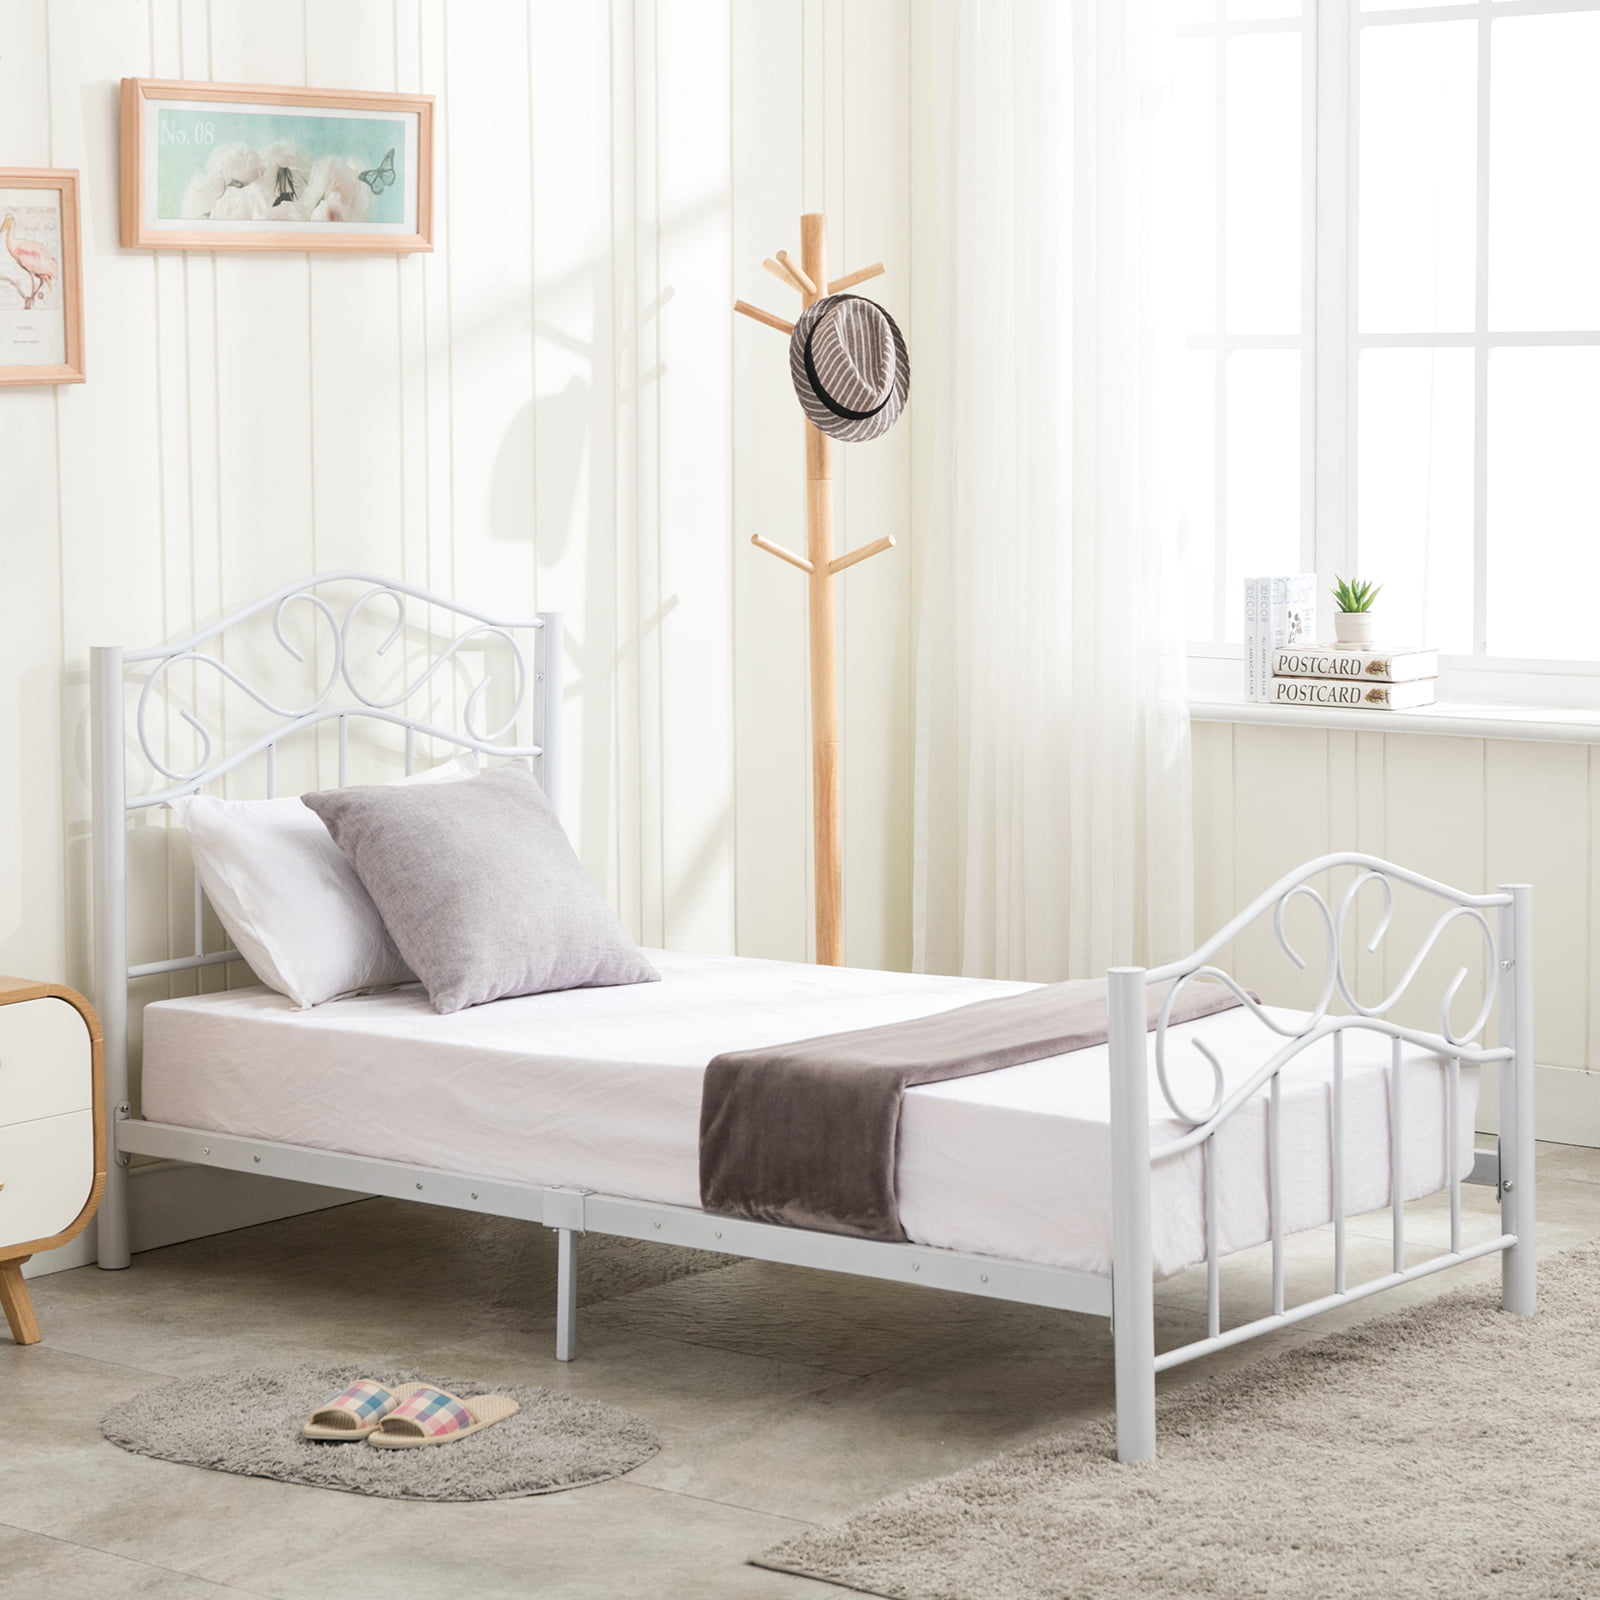 Mecor Bed Frame Twin Size Headboard, Pretty Metal Bed Frames